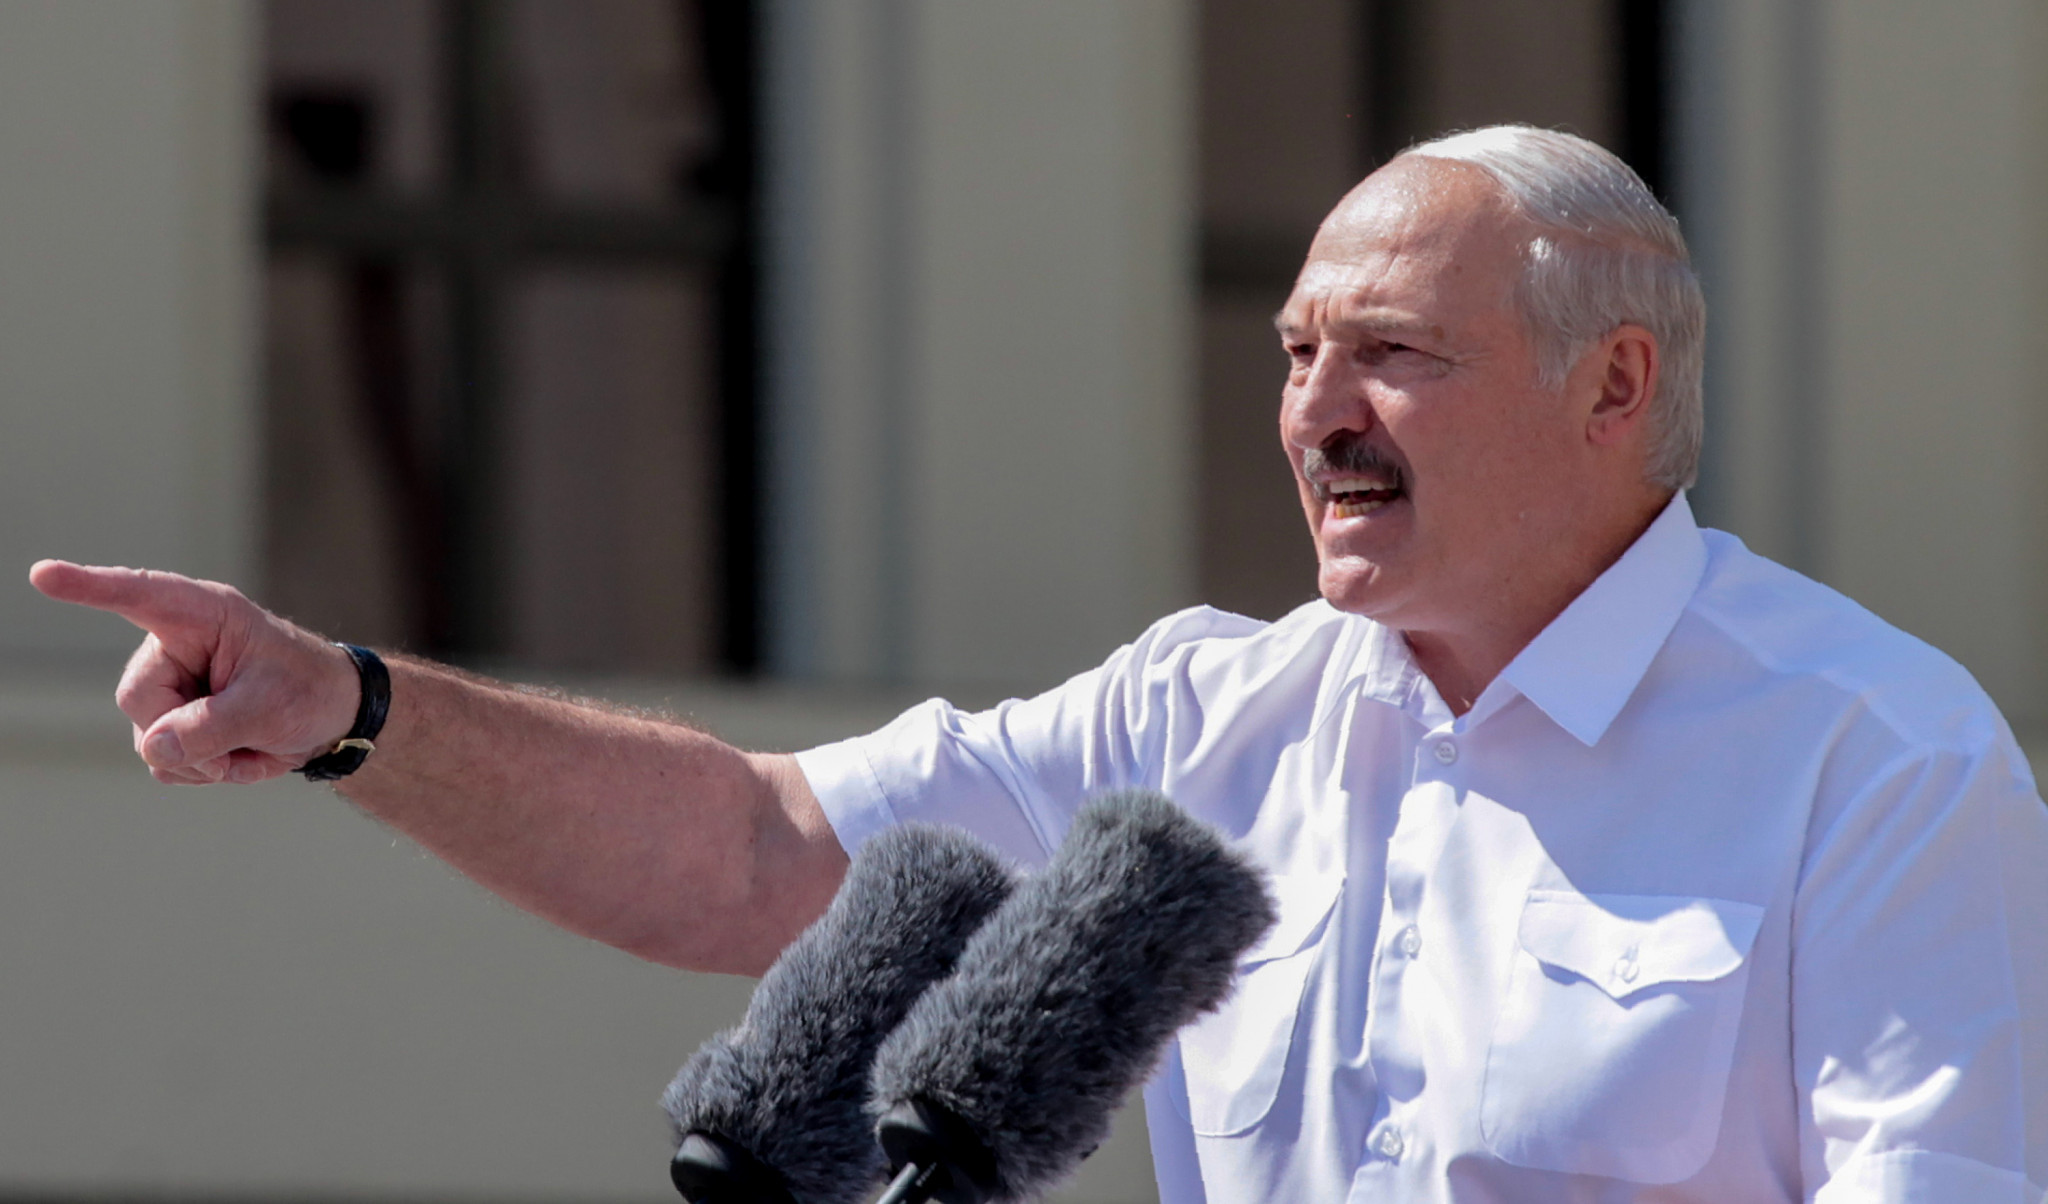 Head of the Belarus NOC Alexander Lukashenko was banned from attending the Tokyo 2020 Olympic Games by the IOC this week ©Getty Images